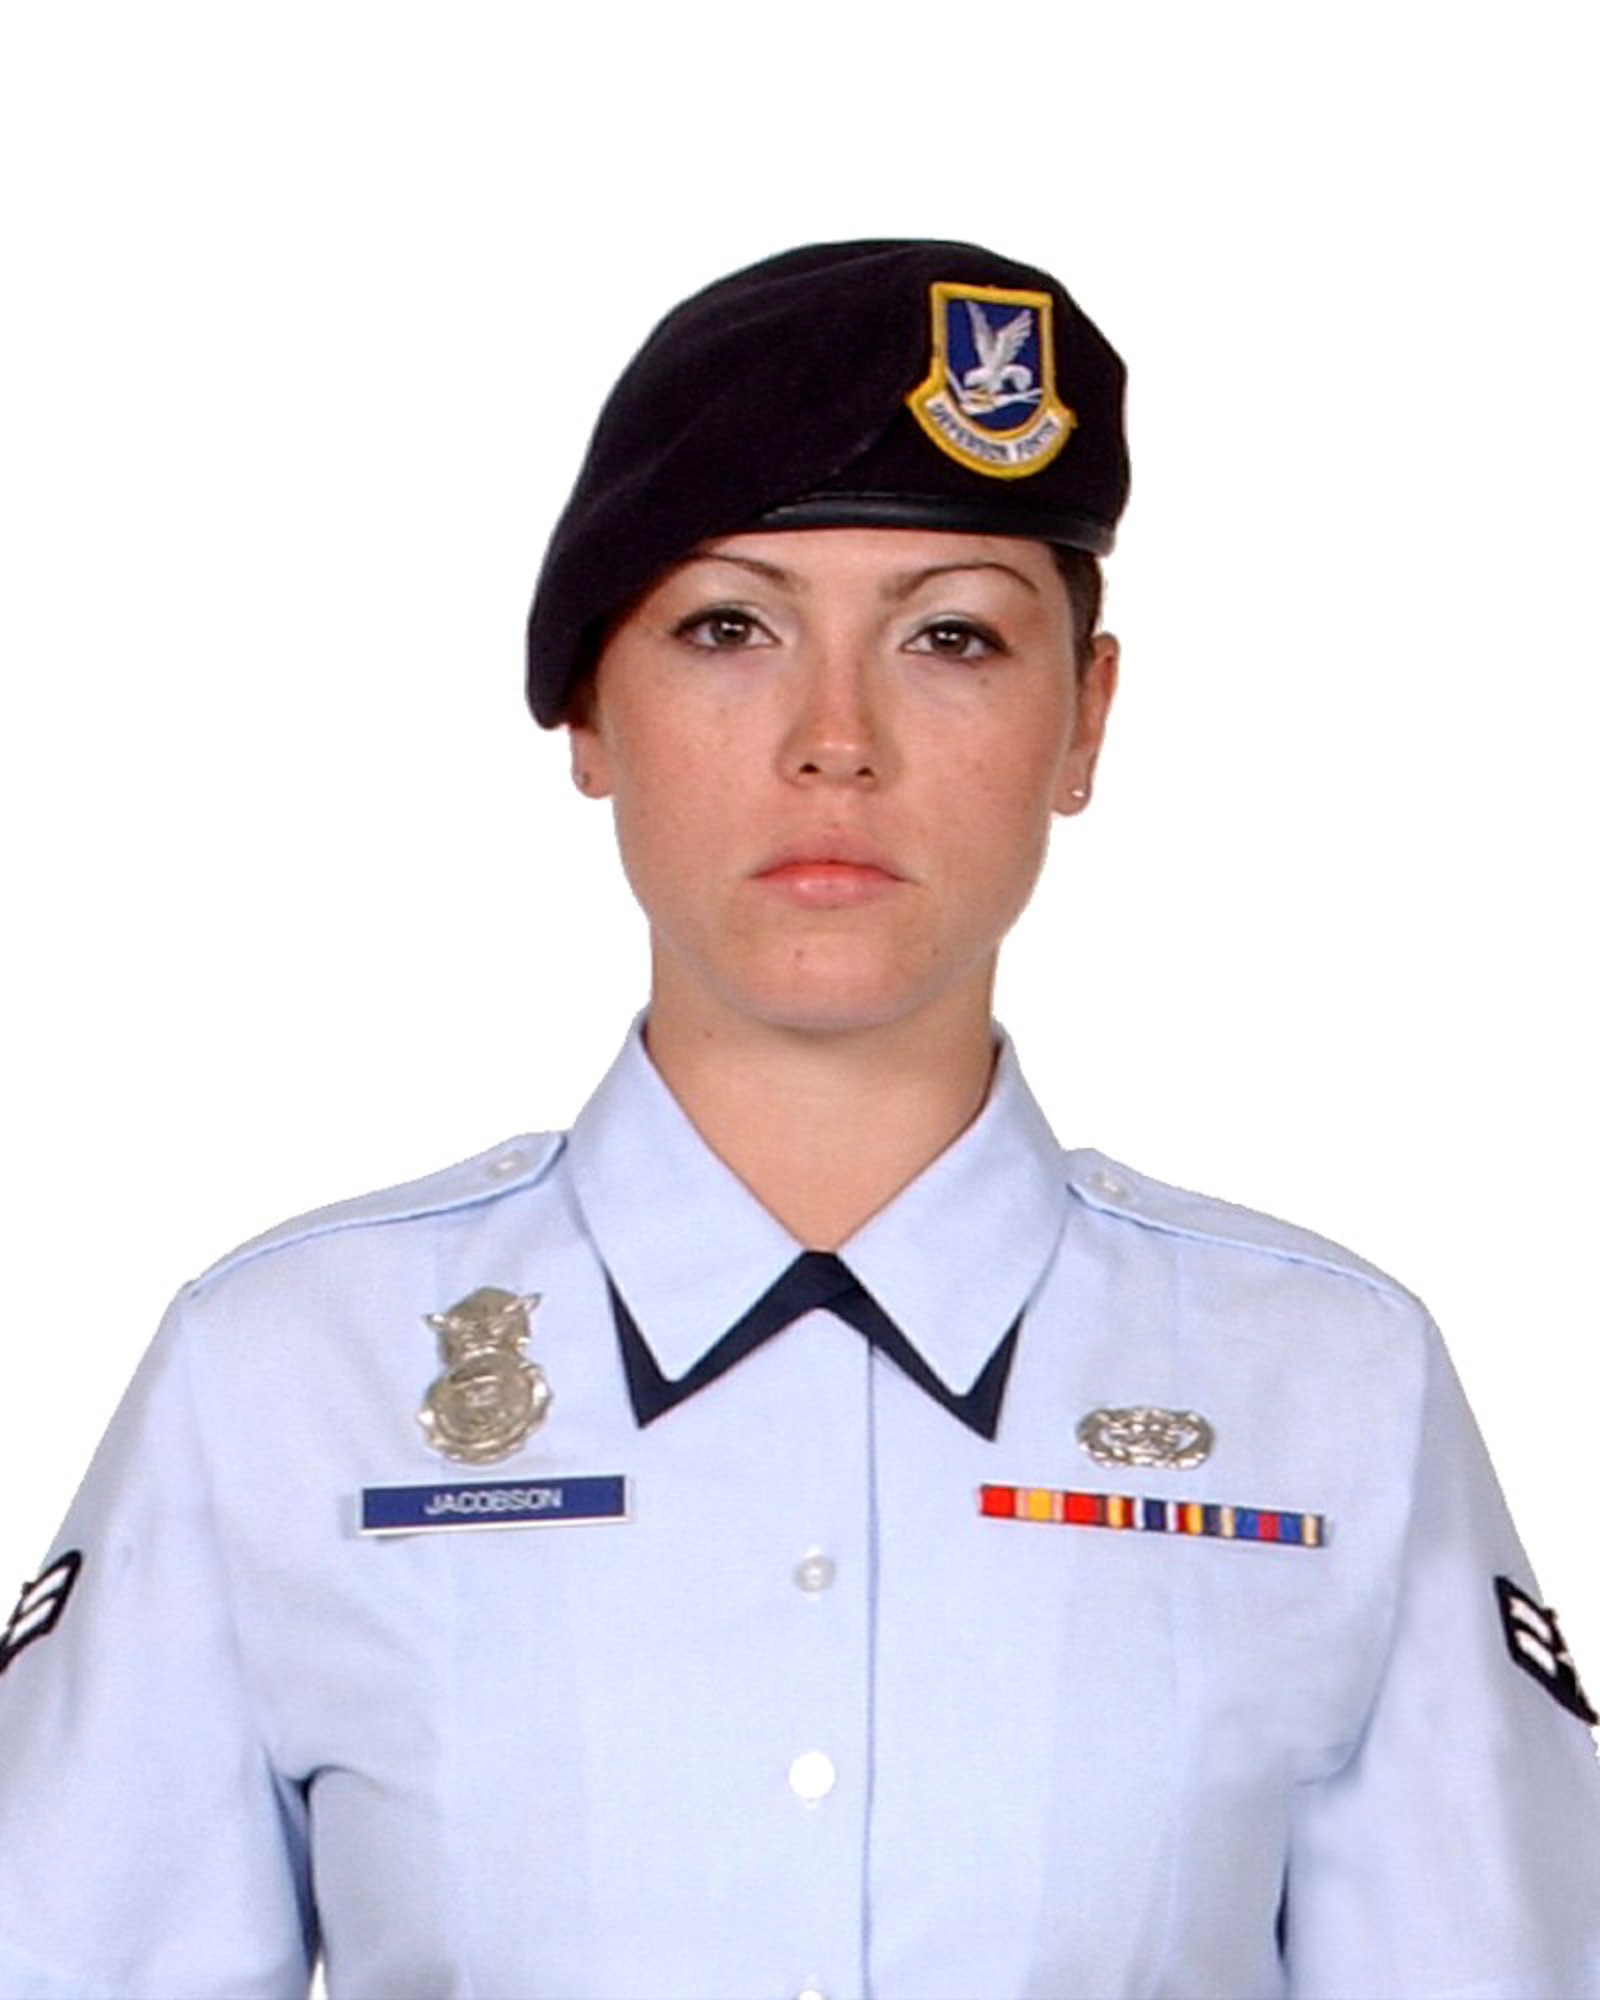 Airman 1st Class Elizabeth Jacobson, 21, was providing convoy security Sept. 28 near Camp Bucca, Iraq, when the vehicle she was riding in was hit by an improvised explosive device. (Courtesy photo)
